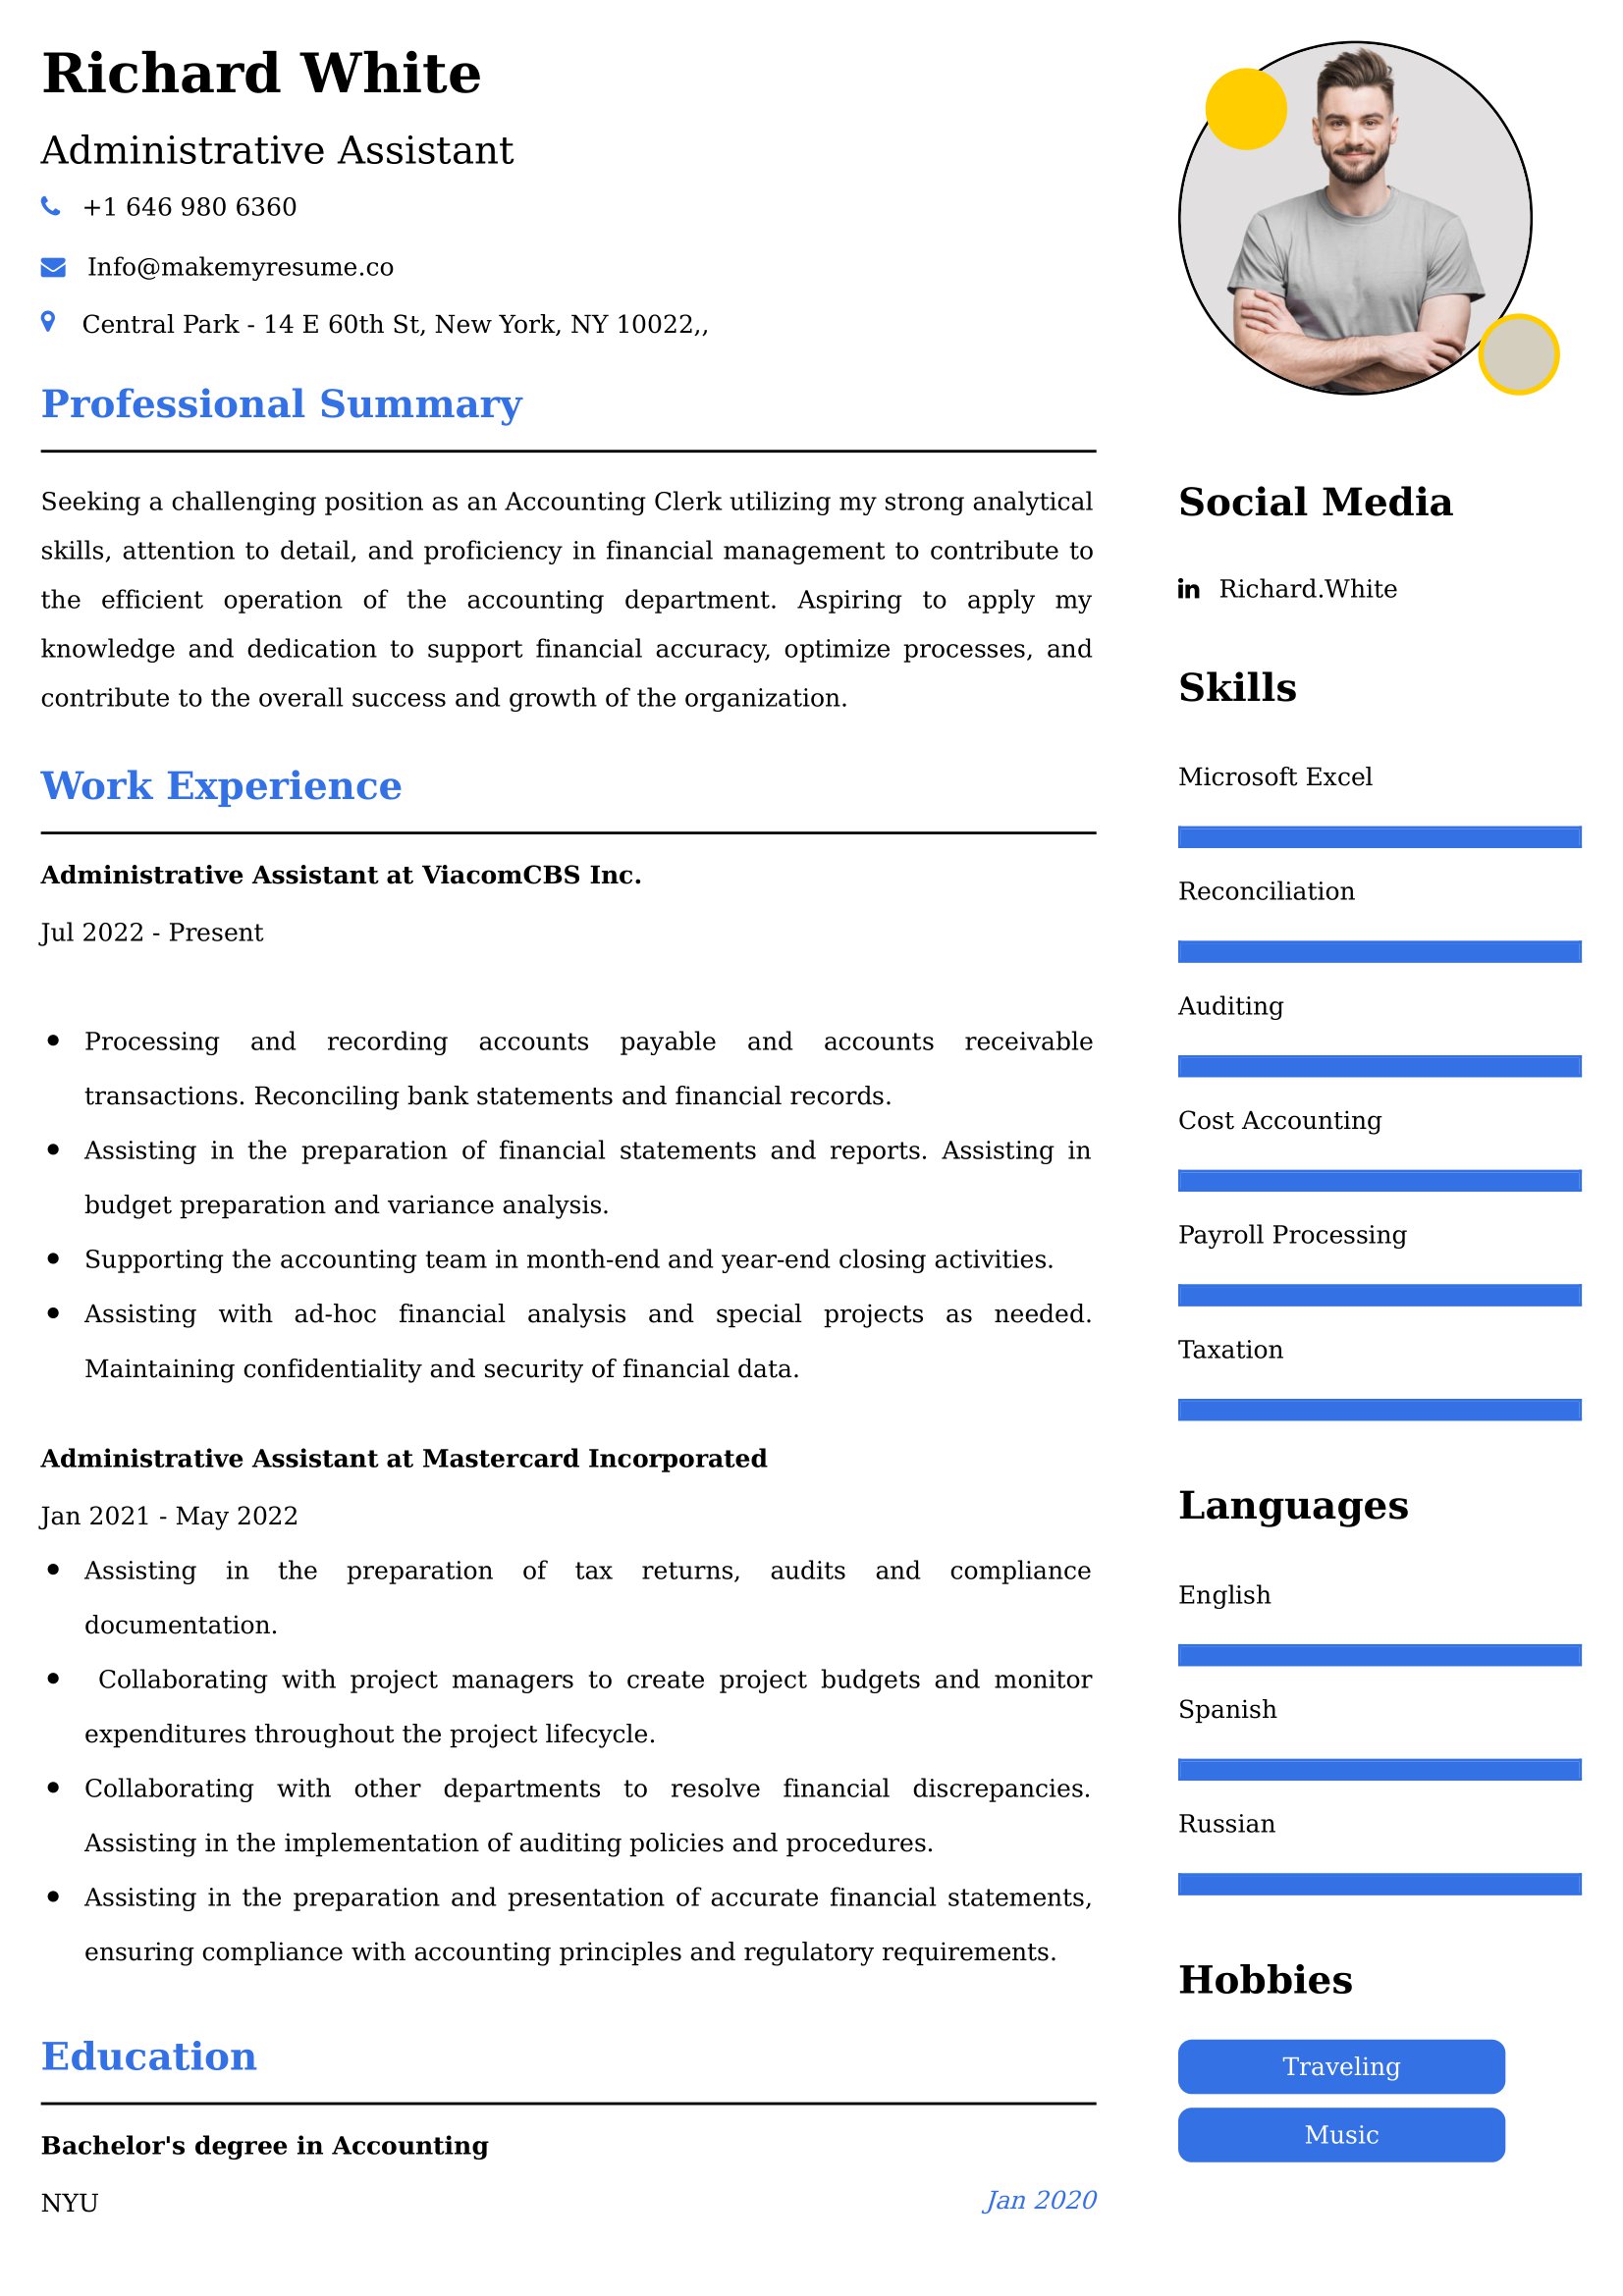 Administrative Assistant Resume Examples - Australian Format and Tips